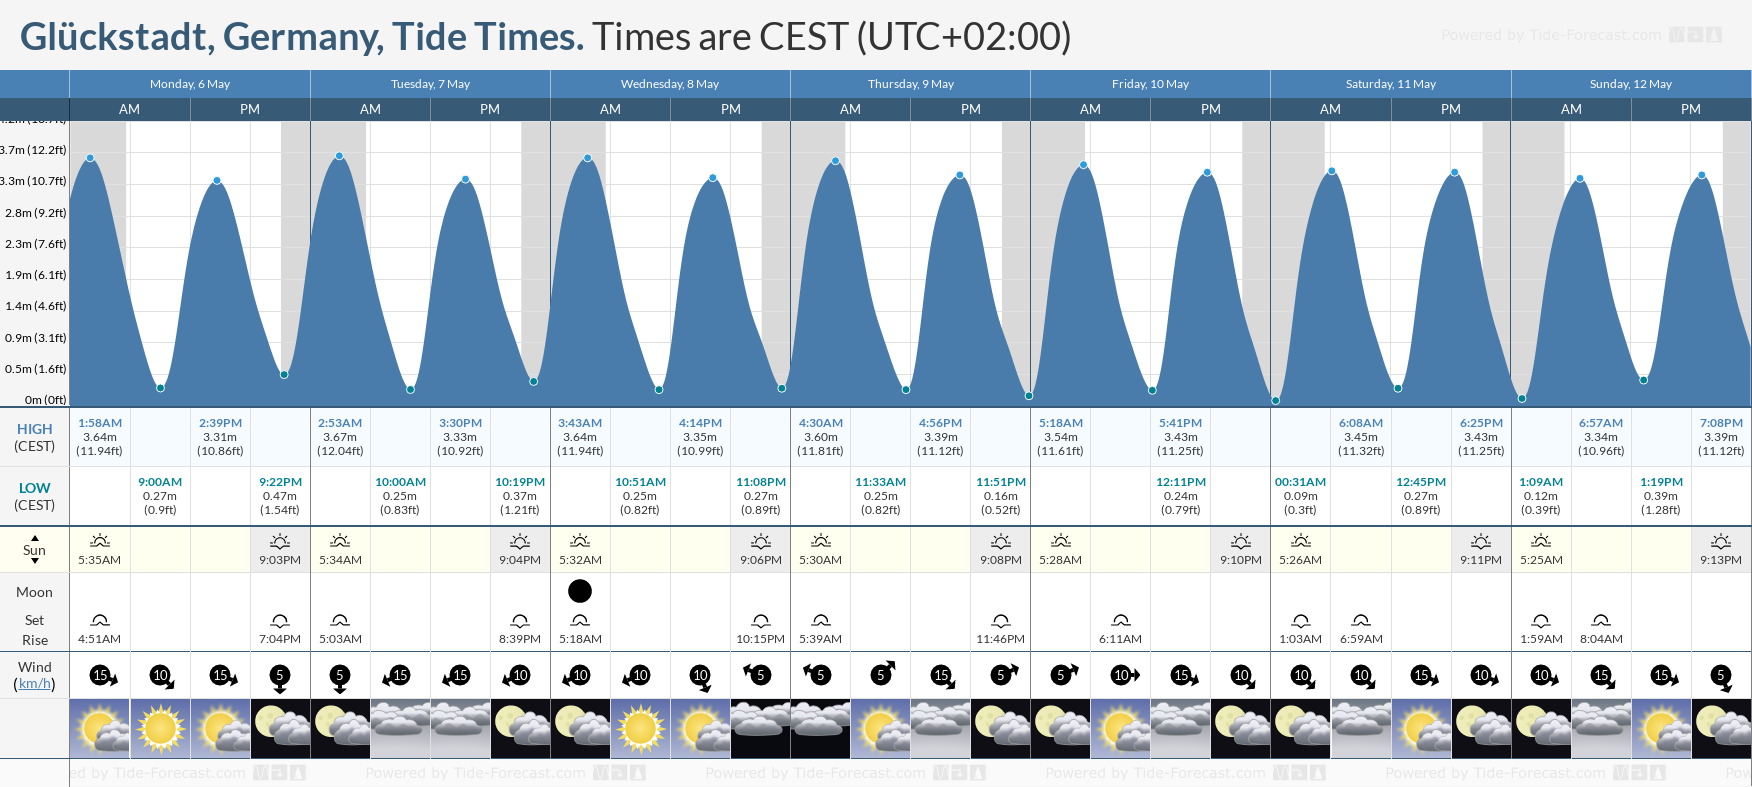 Glückstadt, Germany Tide Chart including high and low tide tide times for the next 7 days